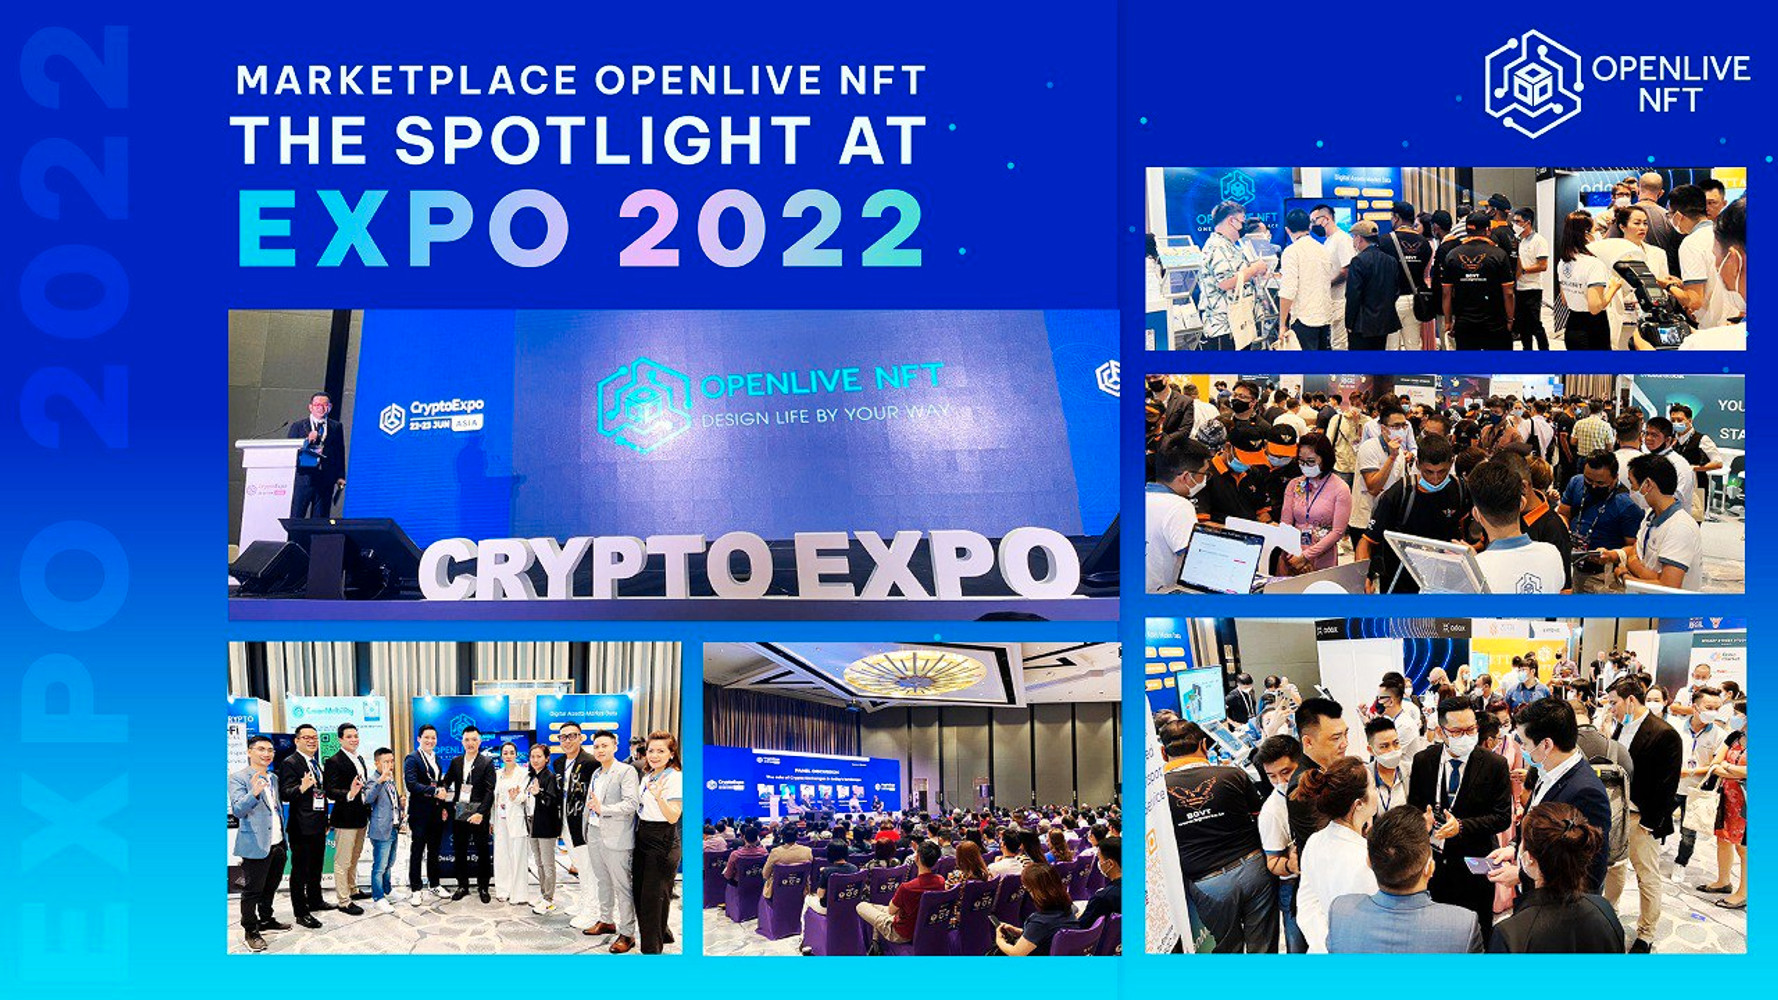 OPENLIVE NFT